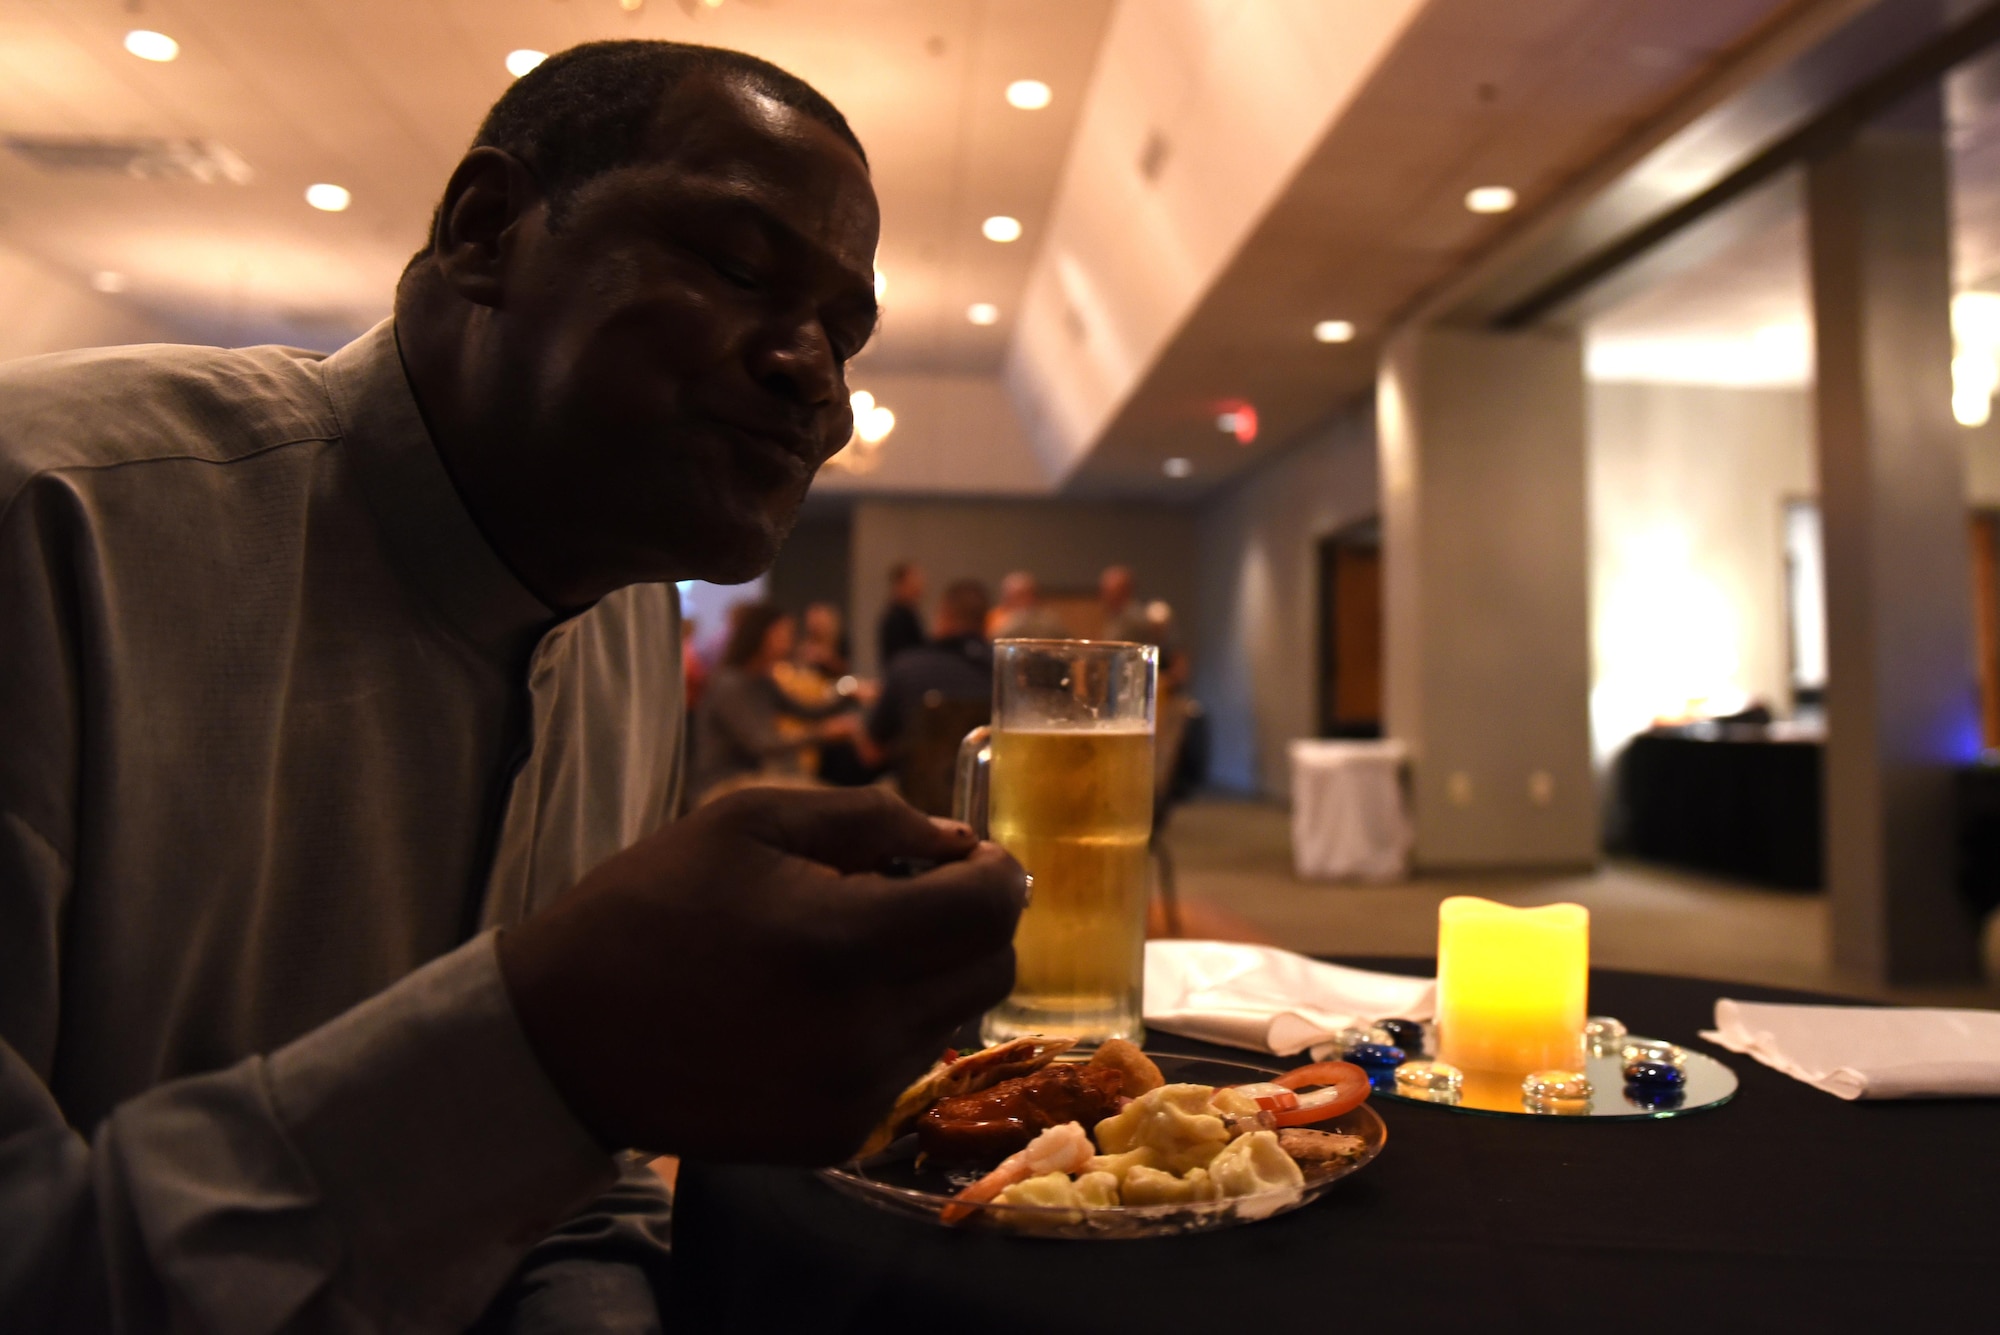 Eric Applewhite, Razorback Inn laborer, samples an entrée during a food tasting event hosted by the 19th Force Support Squadron Oct. 3, 2016, at Hangar 1080 on Little Rock Air Force Base, Ark. The event provided an opportunity for attendees to sample new food items available at base dining facilities under the 19th FSS non-appropriated funds operation. (U.S. Air Force photo by Airman Kevin Sommer Giron)